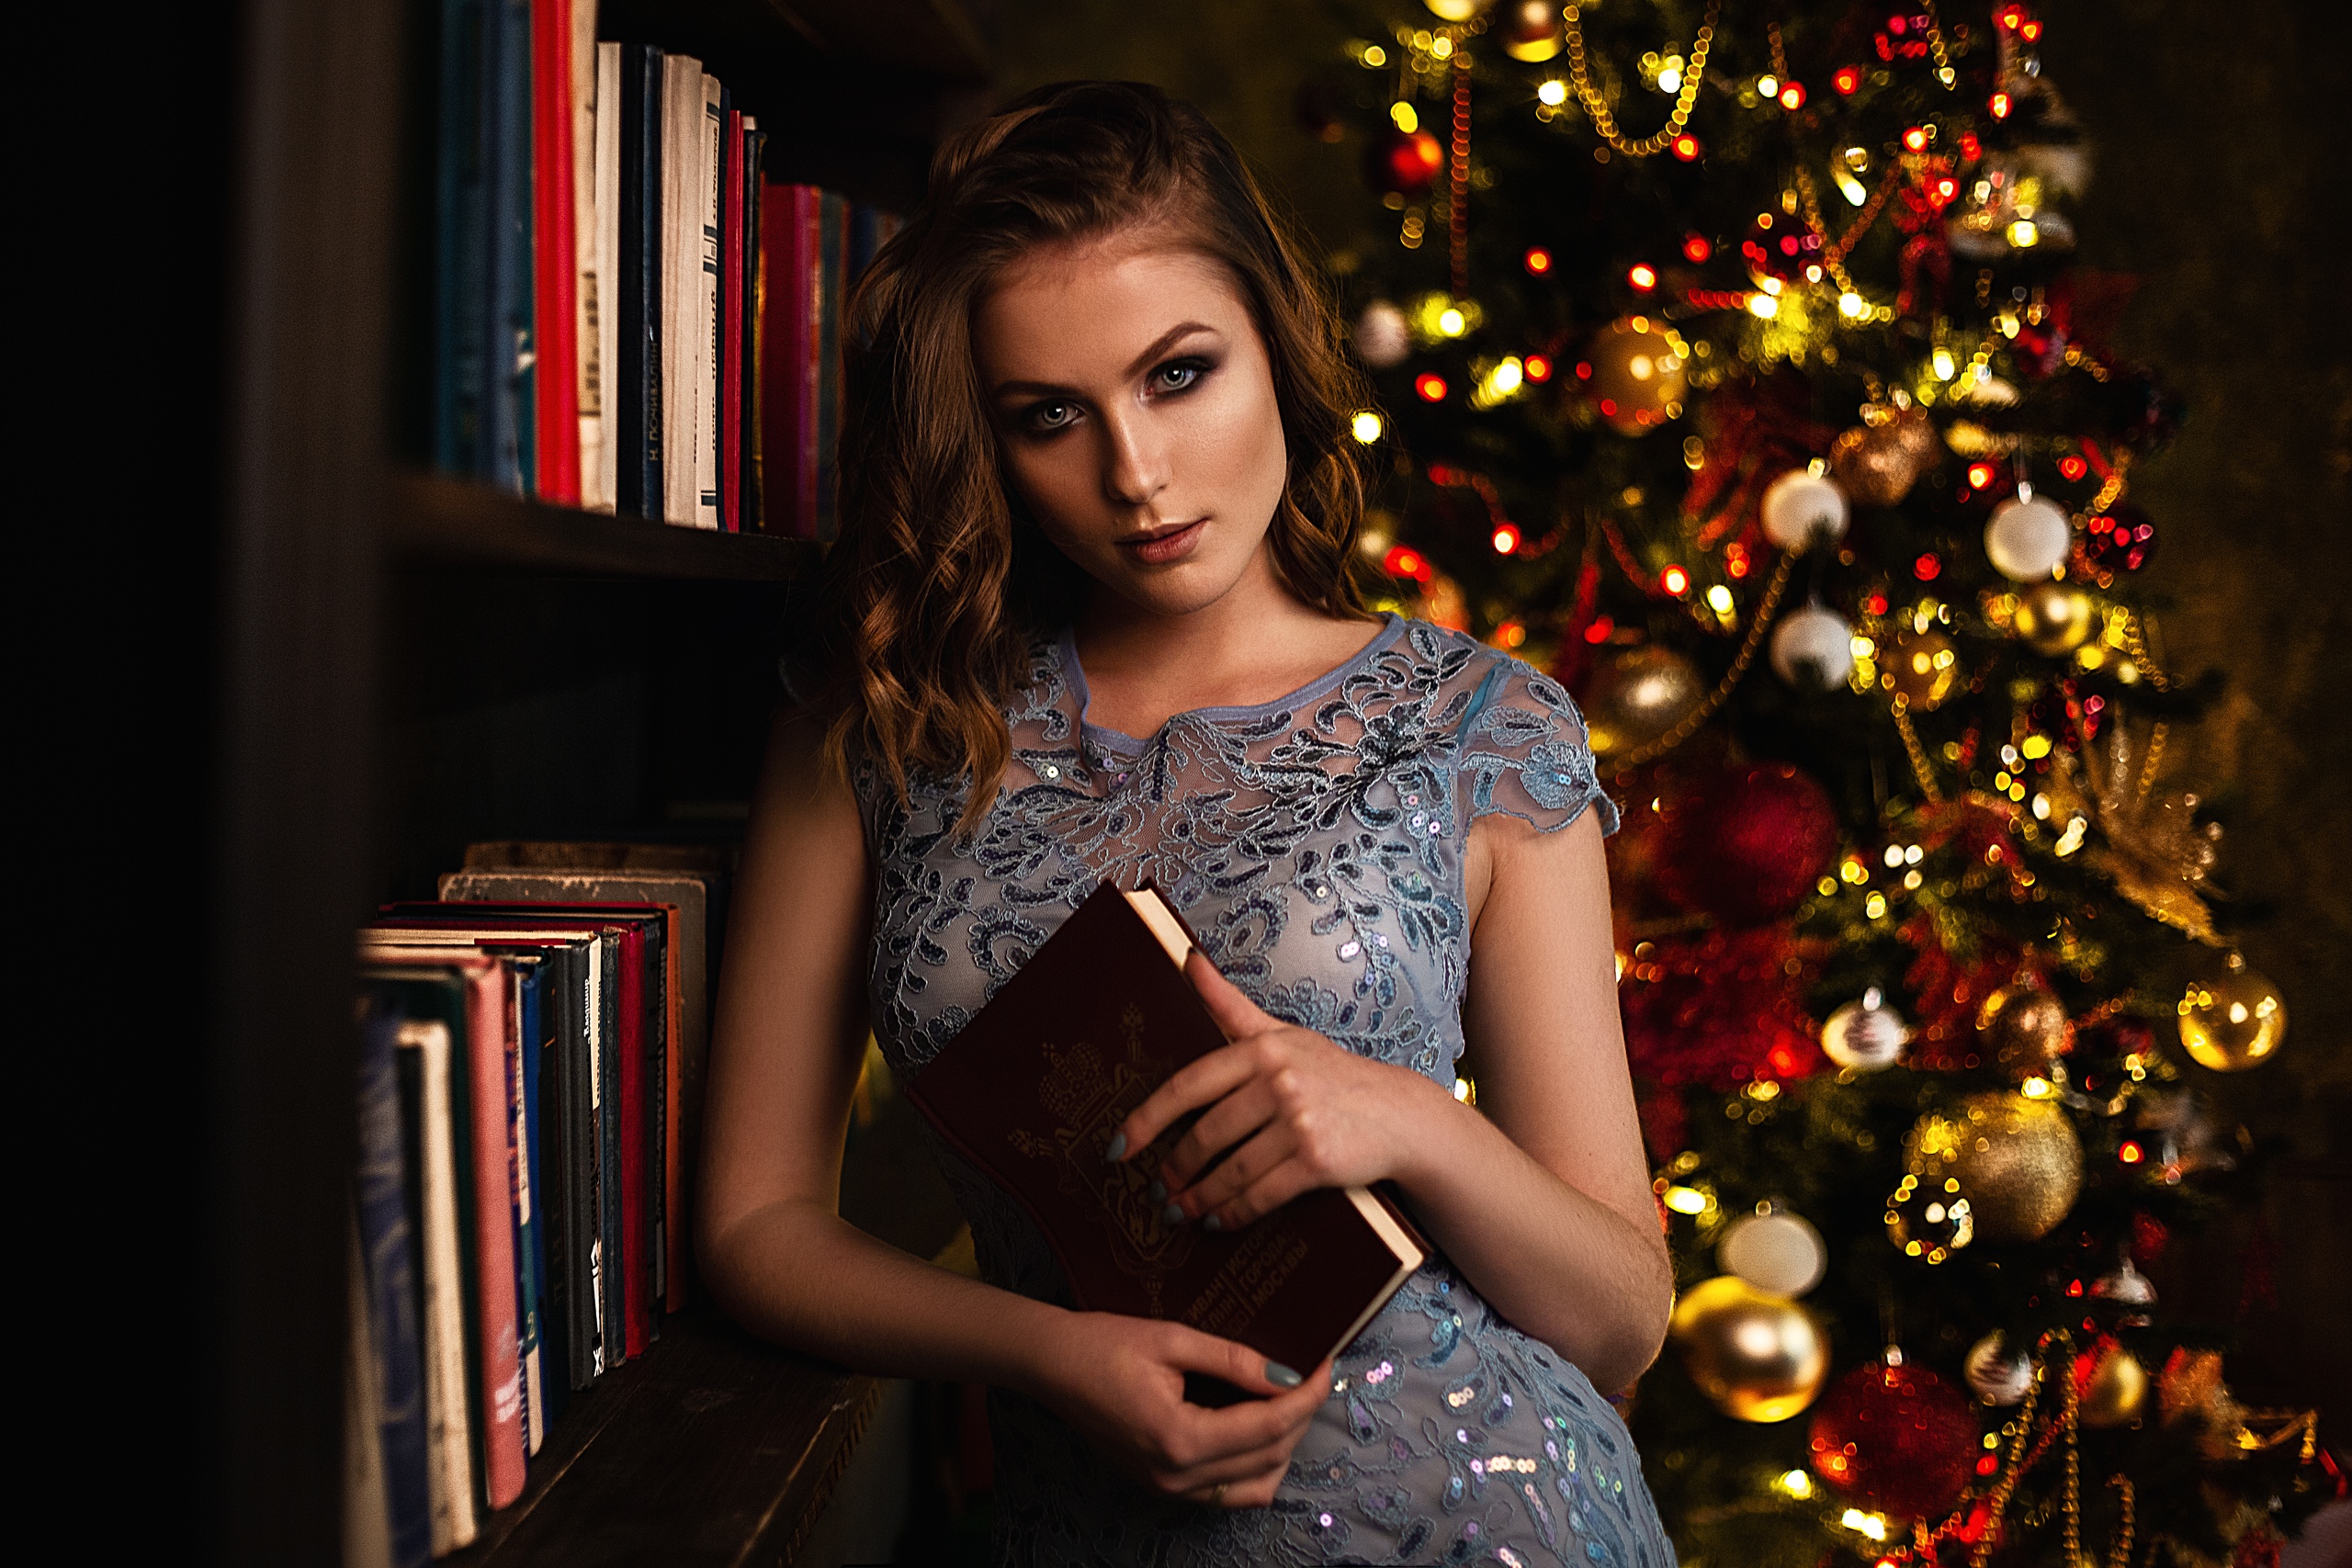 Women Model Brunette Looking At Viewer Portrait Painted Nails Indoors Christmas Christmas Tree Chris 2560x1707